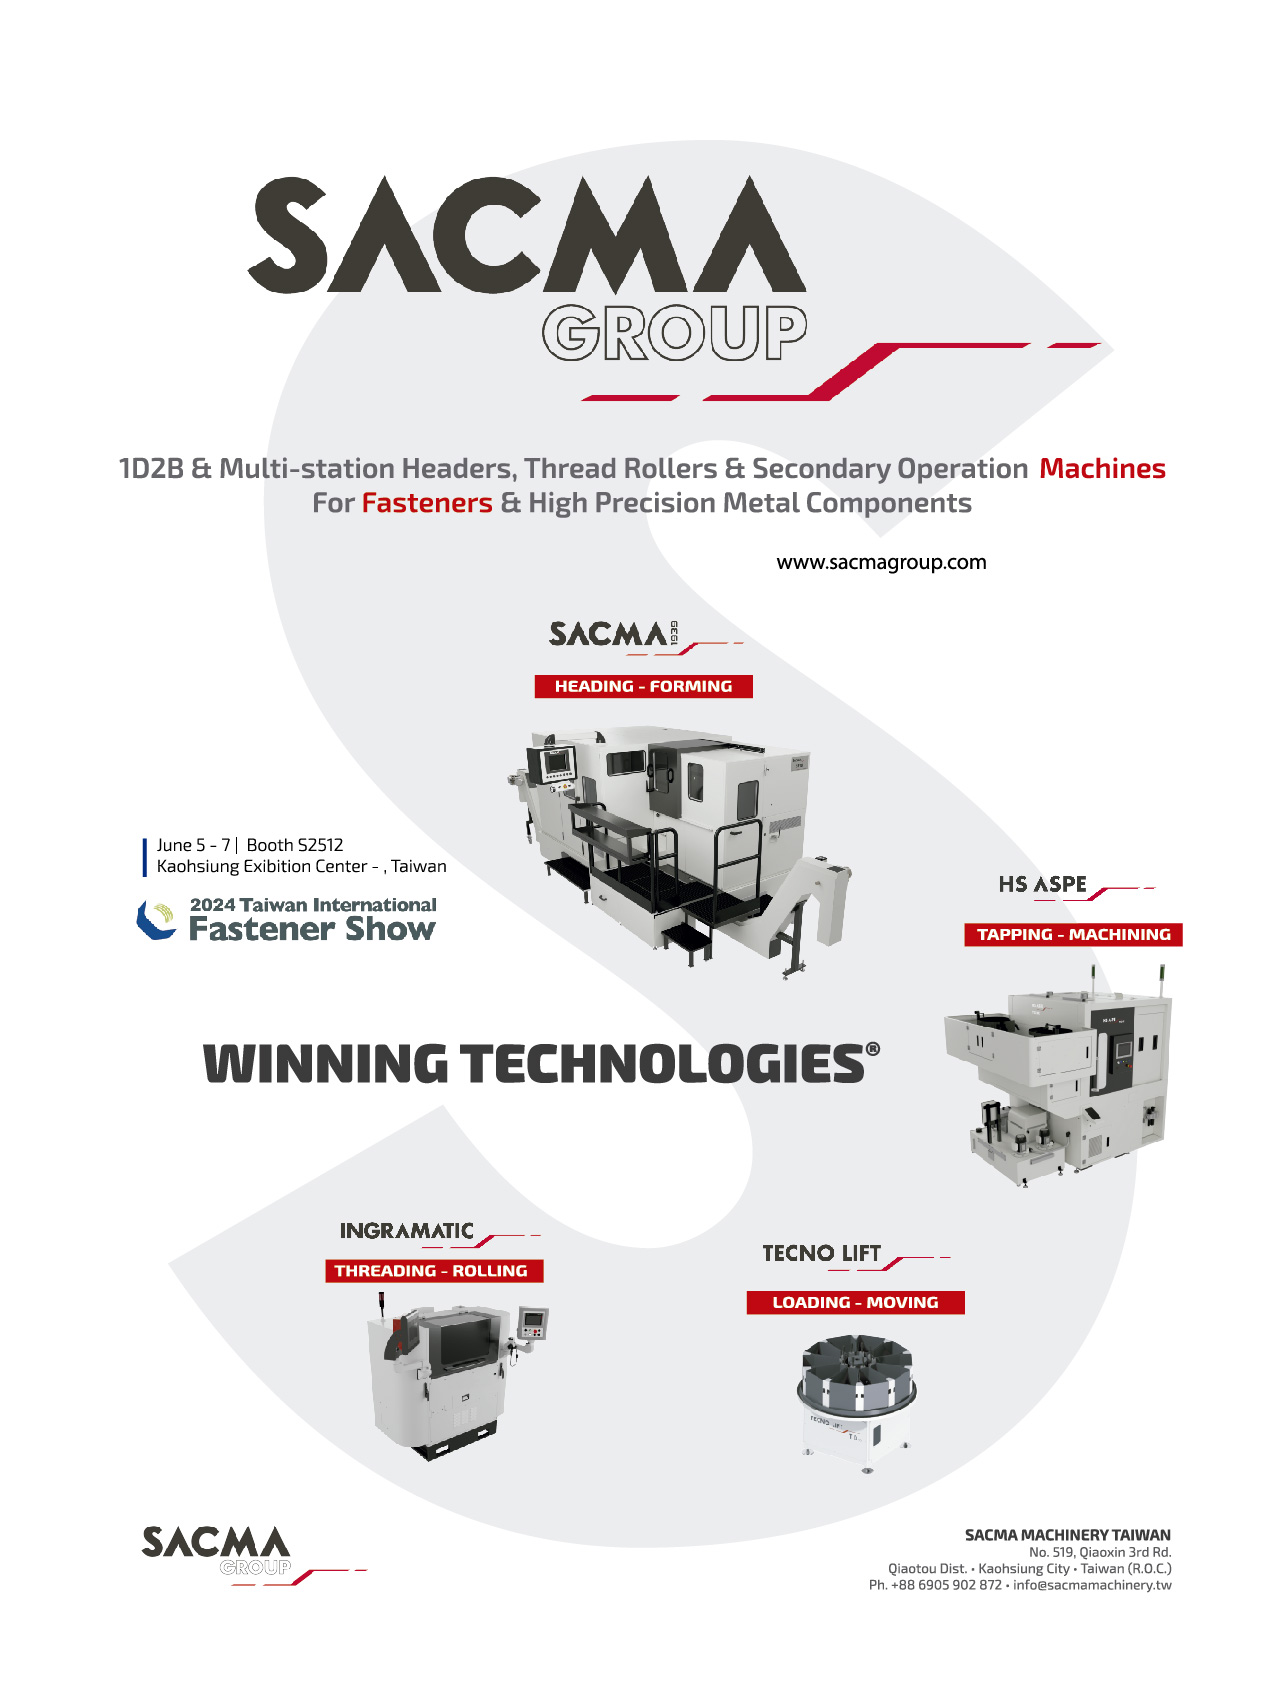 SACMA GROUP , 1D2B & Multi-station Headers, Thread Rollers & Secondary Operation Machines for Fasteners & High Precision Metal Components